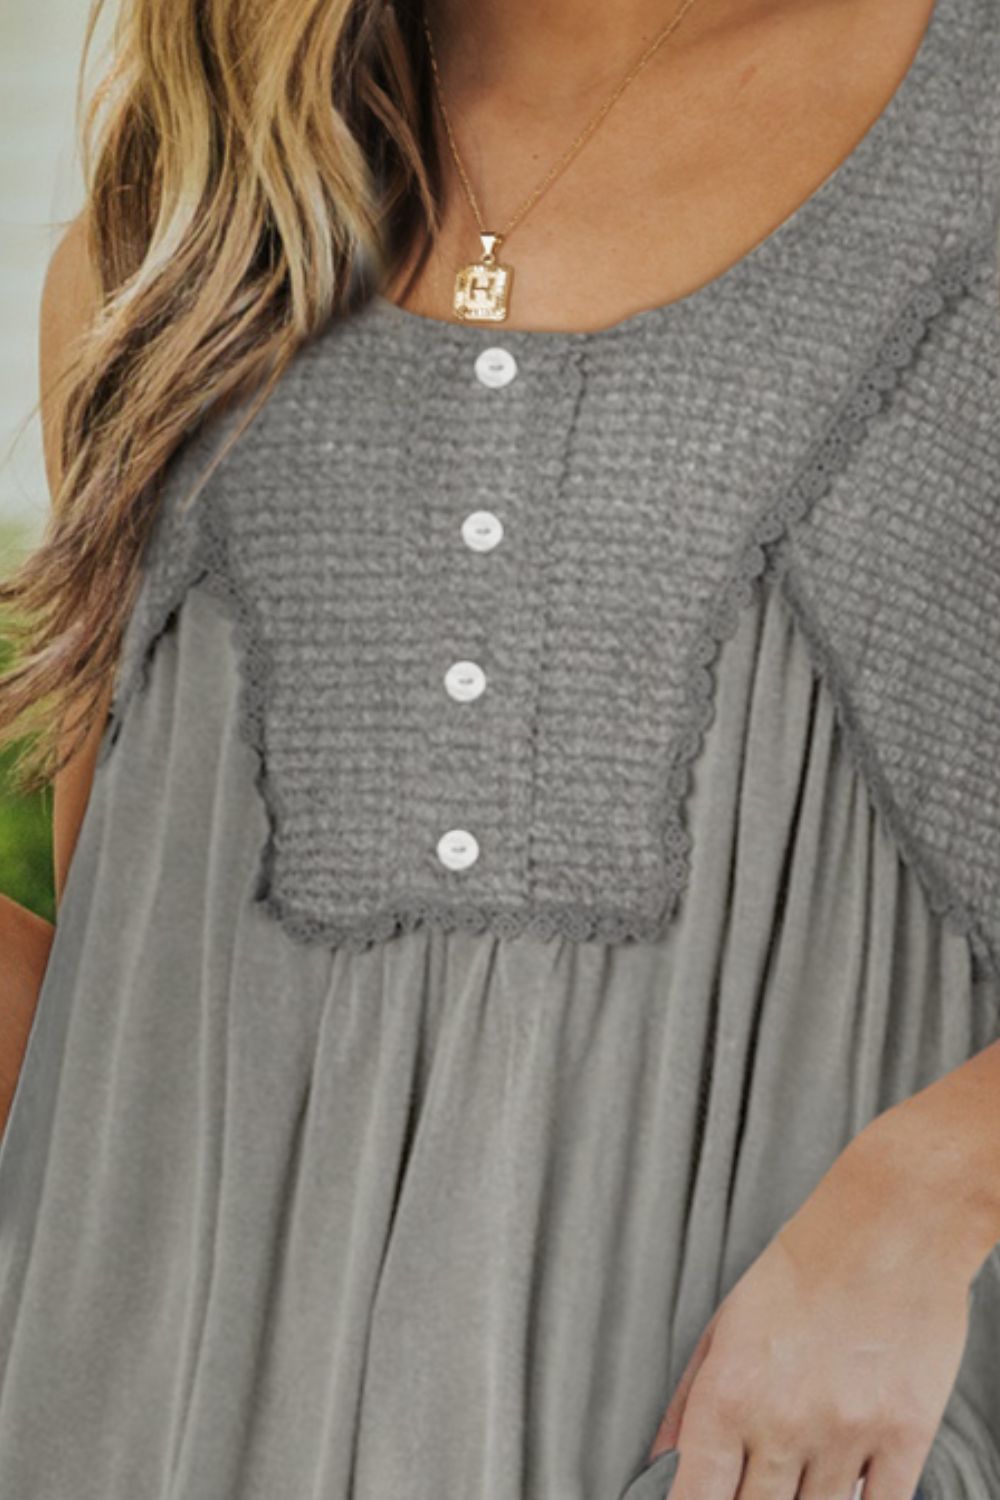 Scoop Neck Tank Top with Decorative Buttons